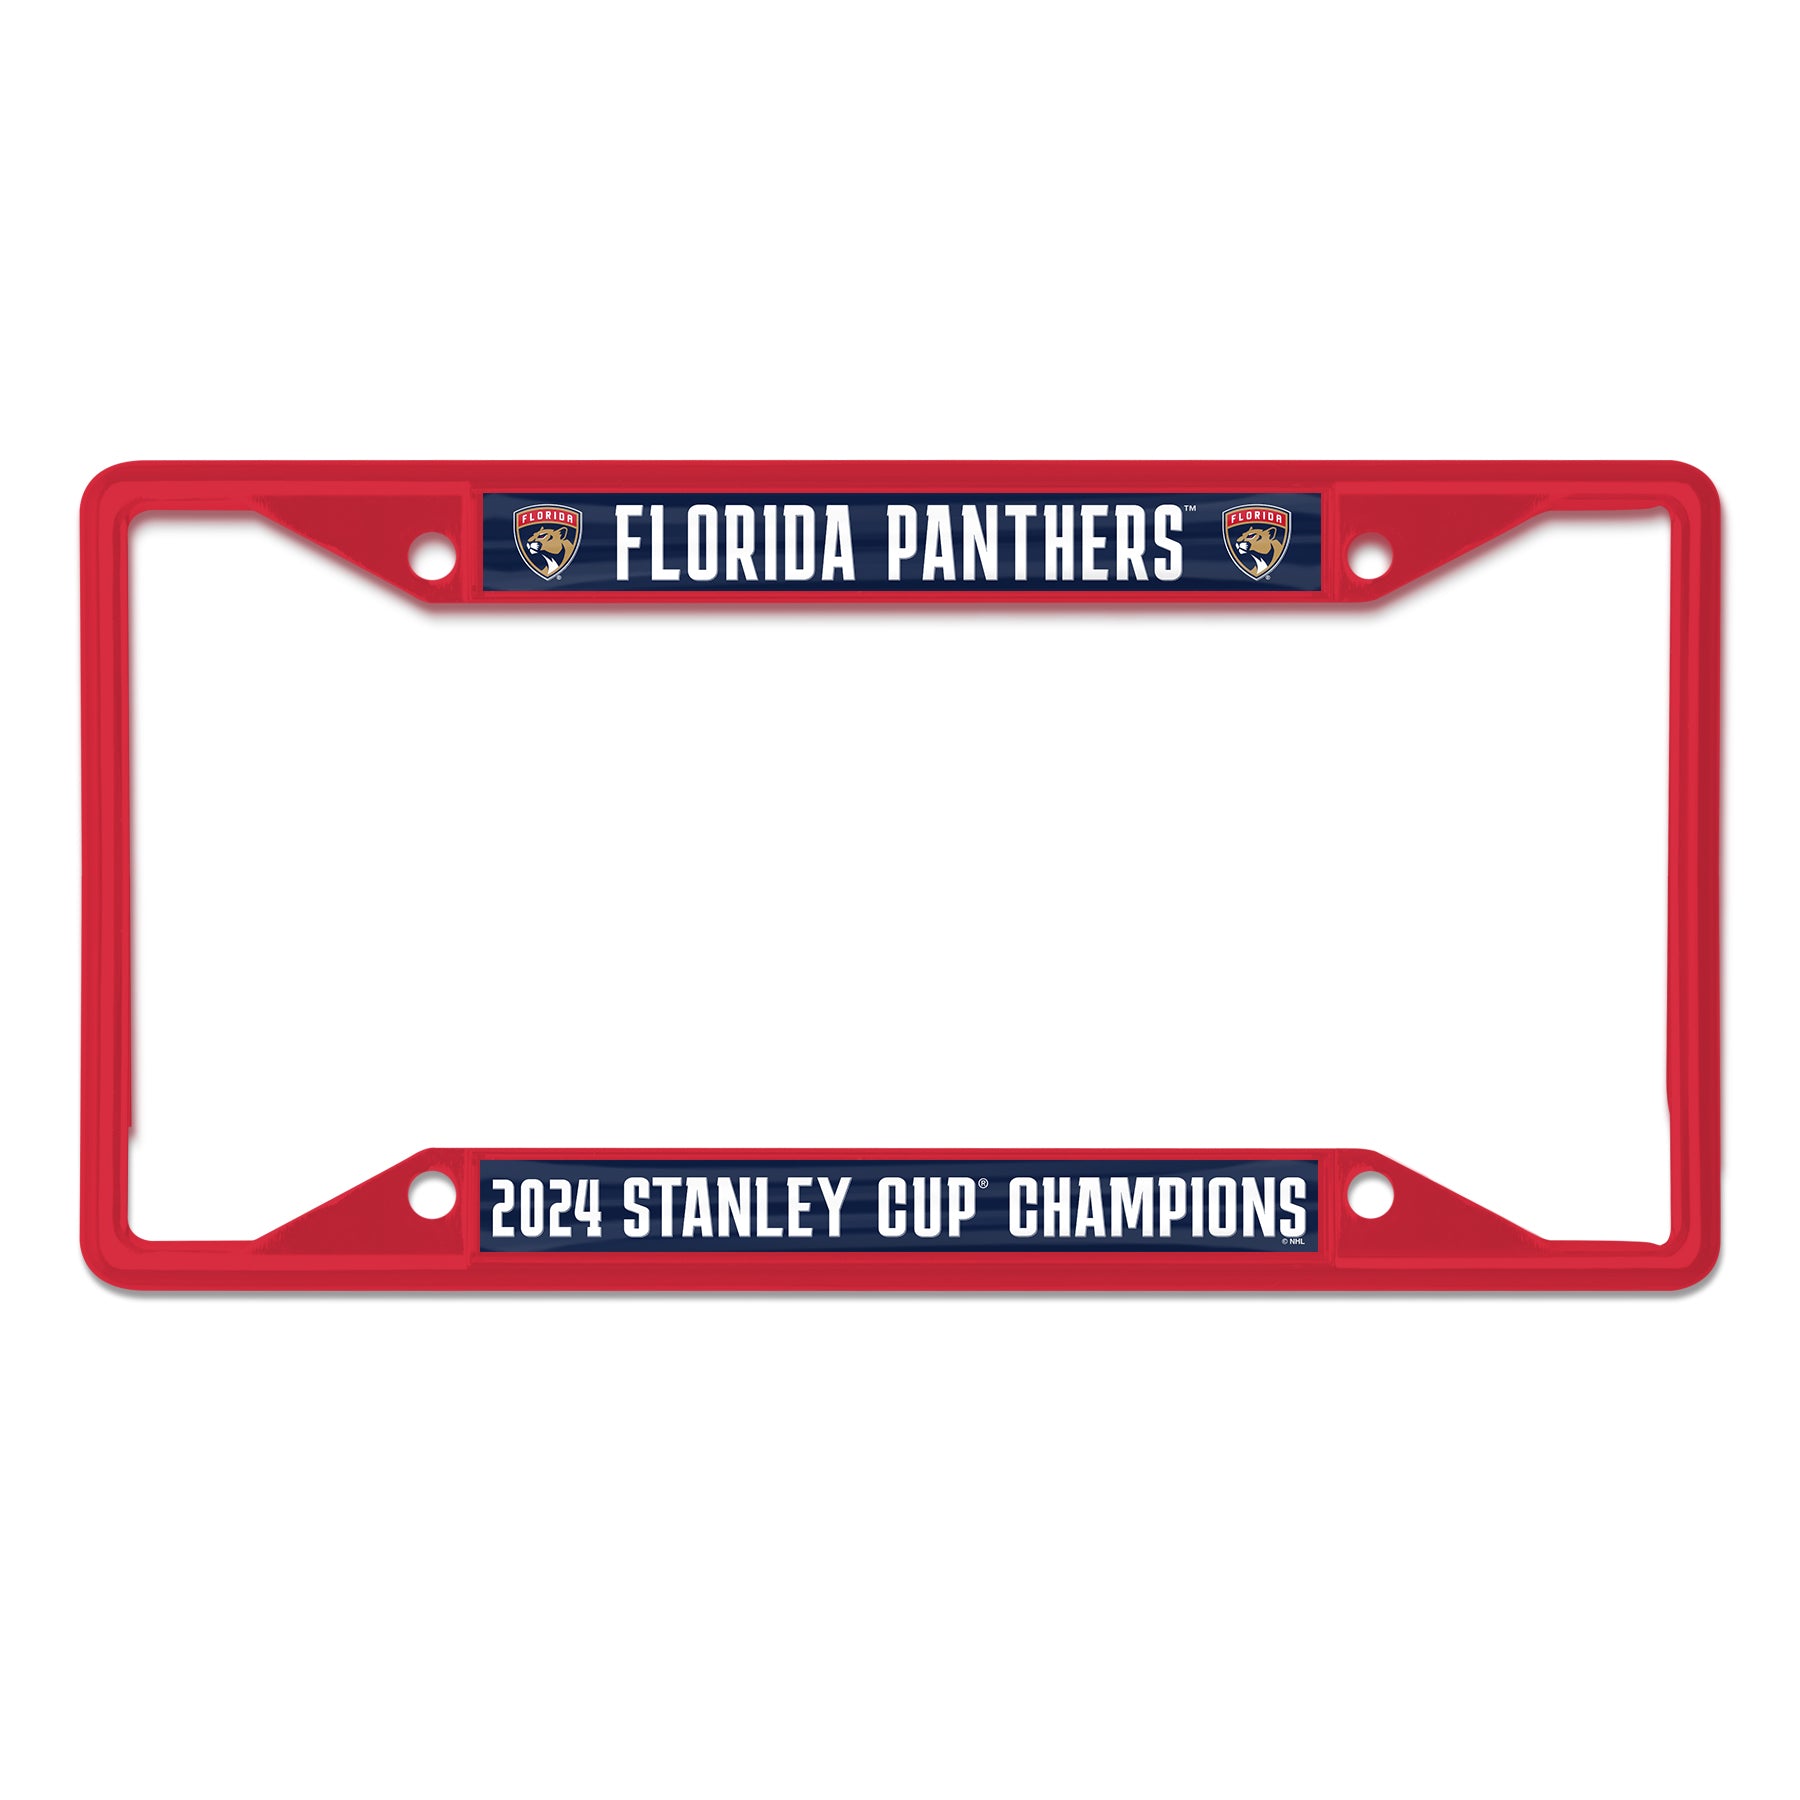 Florida Panthers 2024 Stanley Cup Champions Metal License Plate Frame